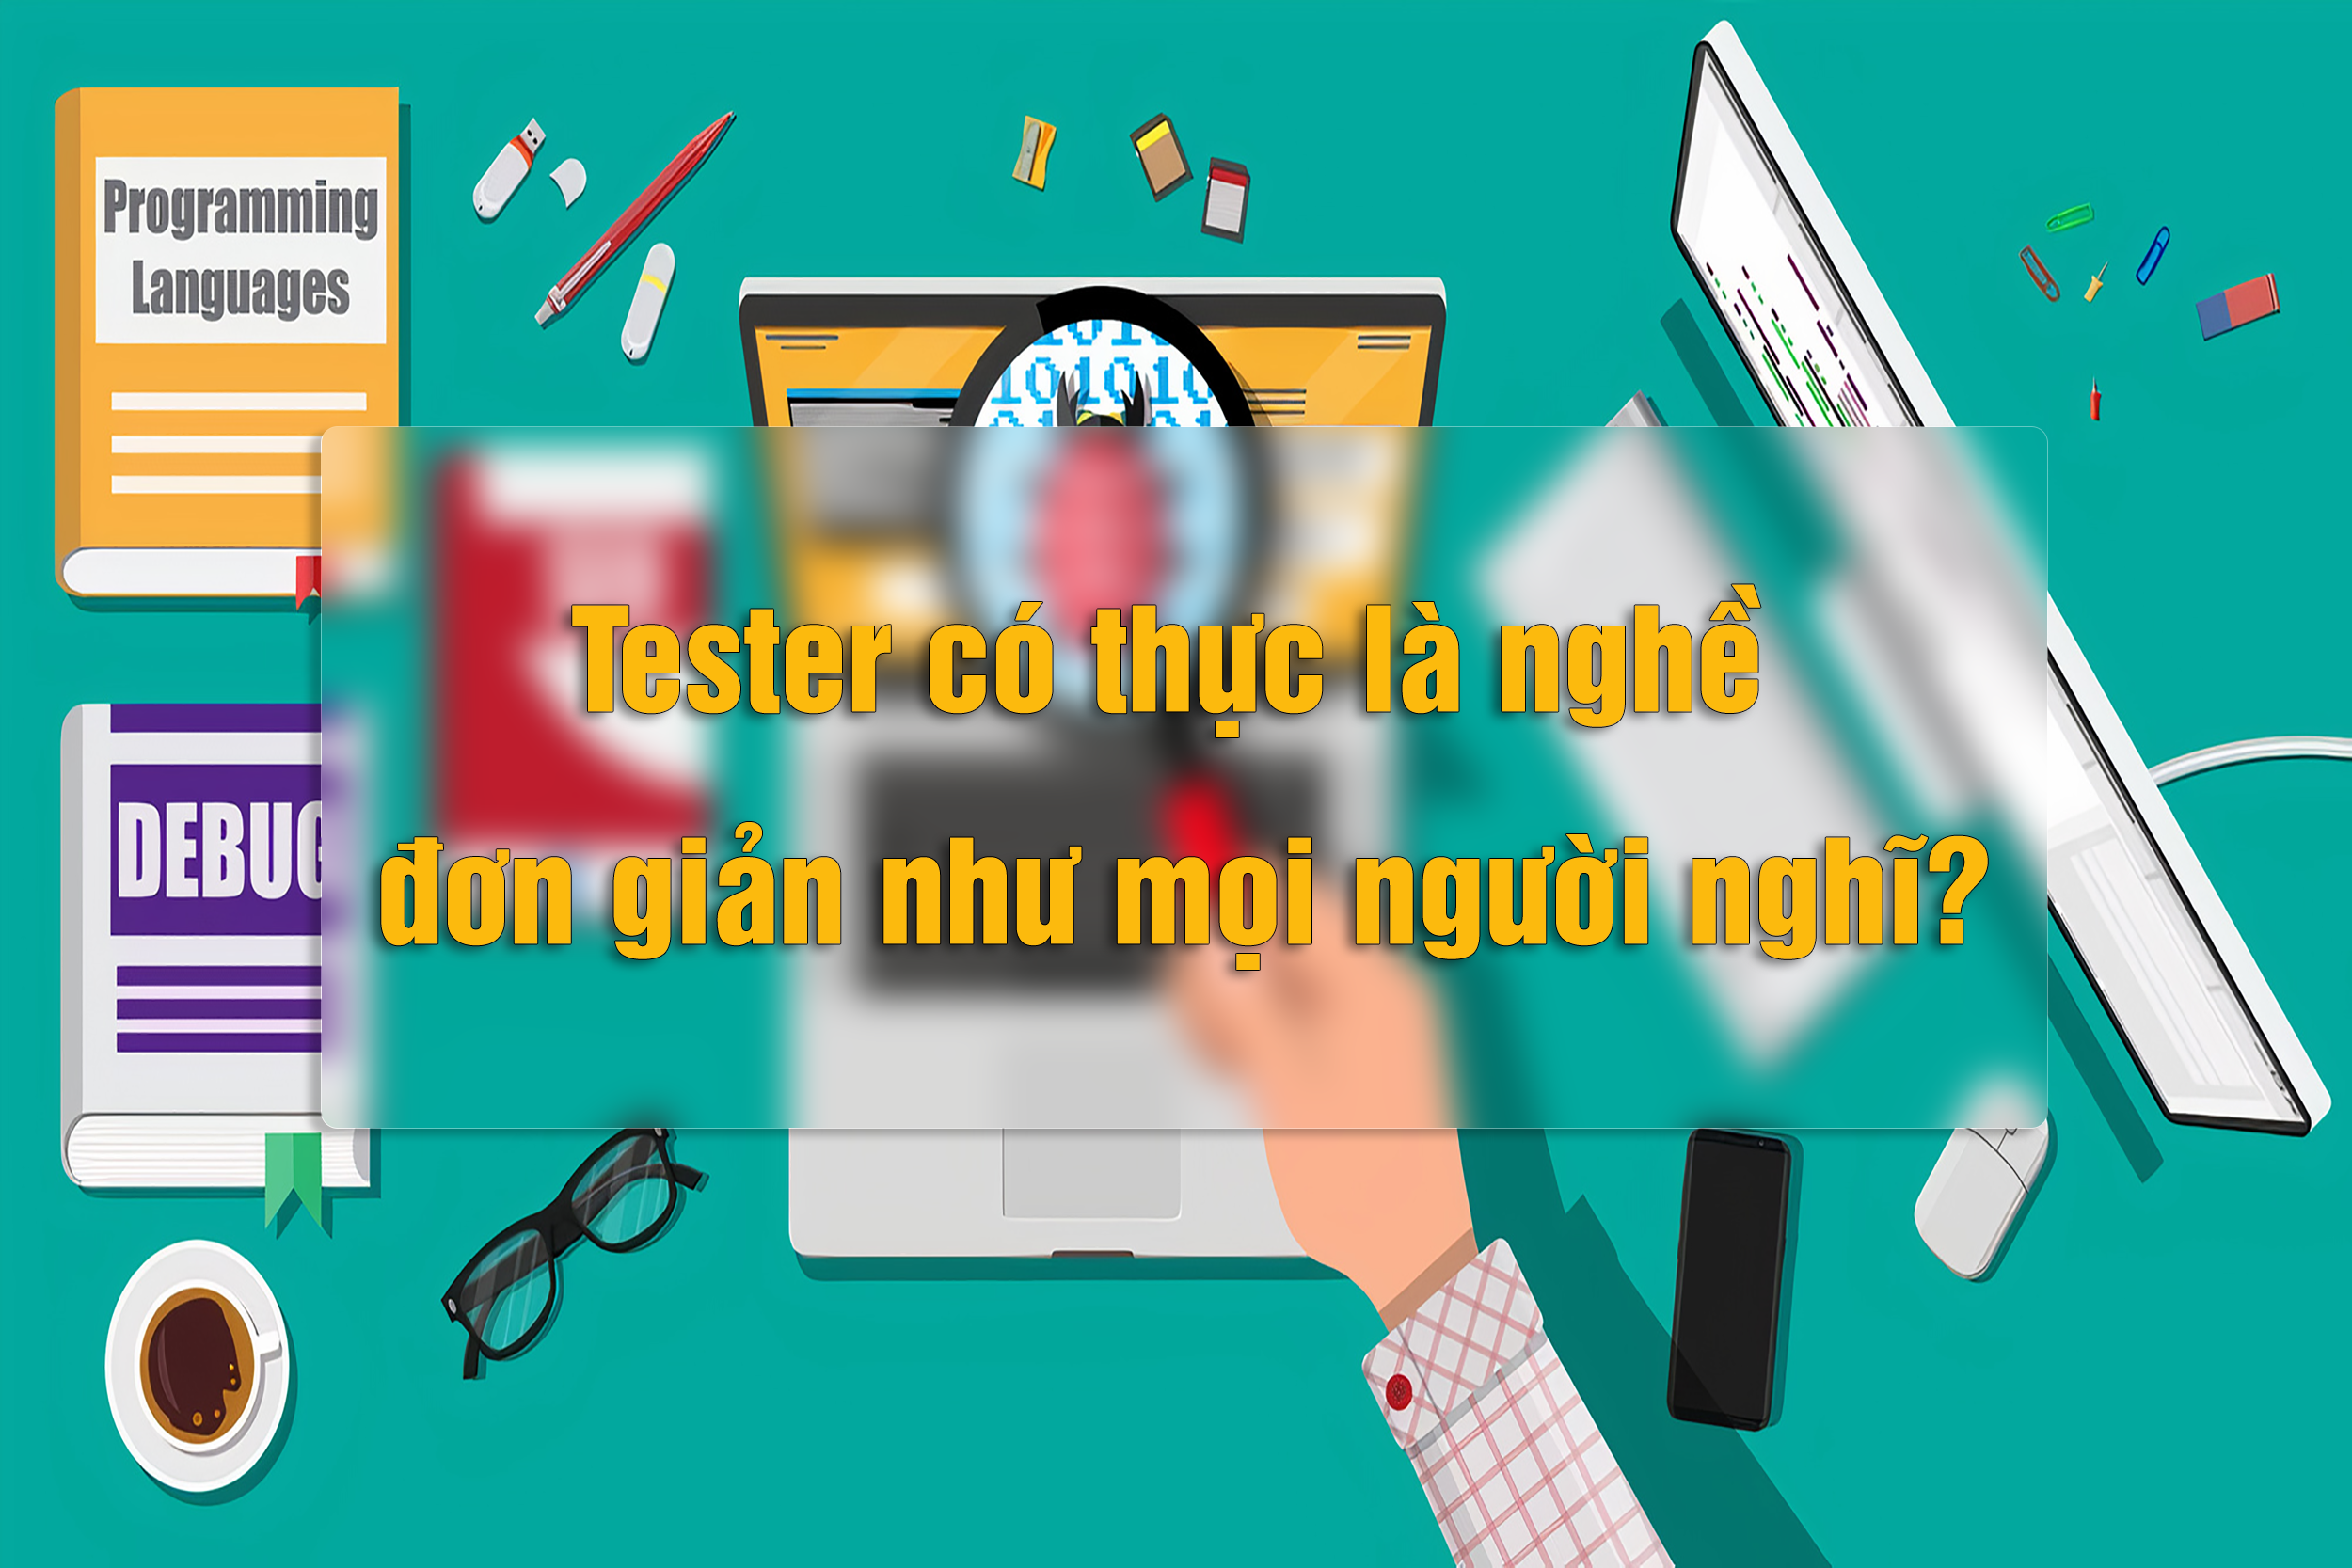 https://www.techlead.vn/wp-content/uploads/2022/03/4-1.png